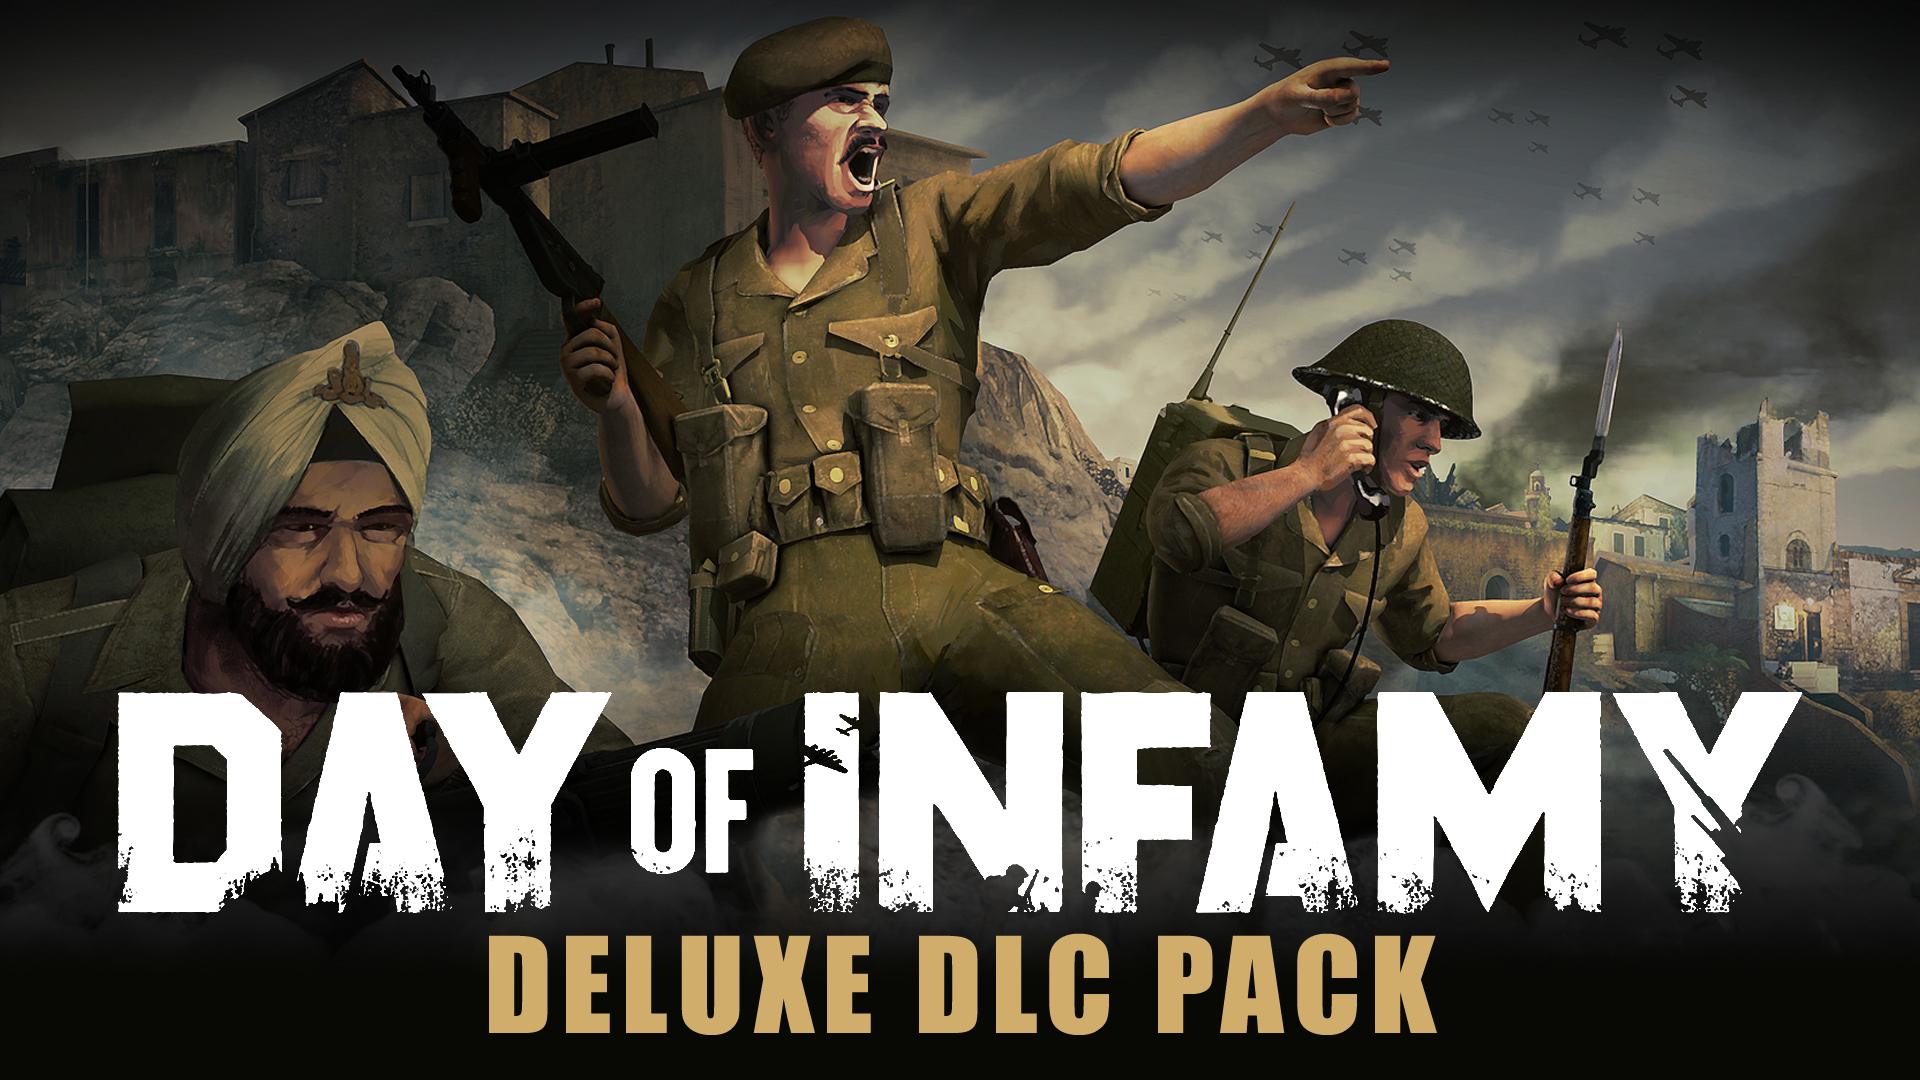 day of infamy german units